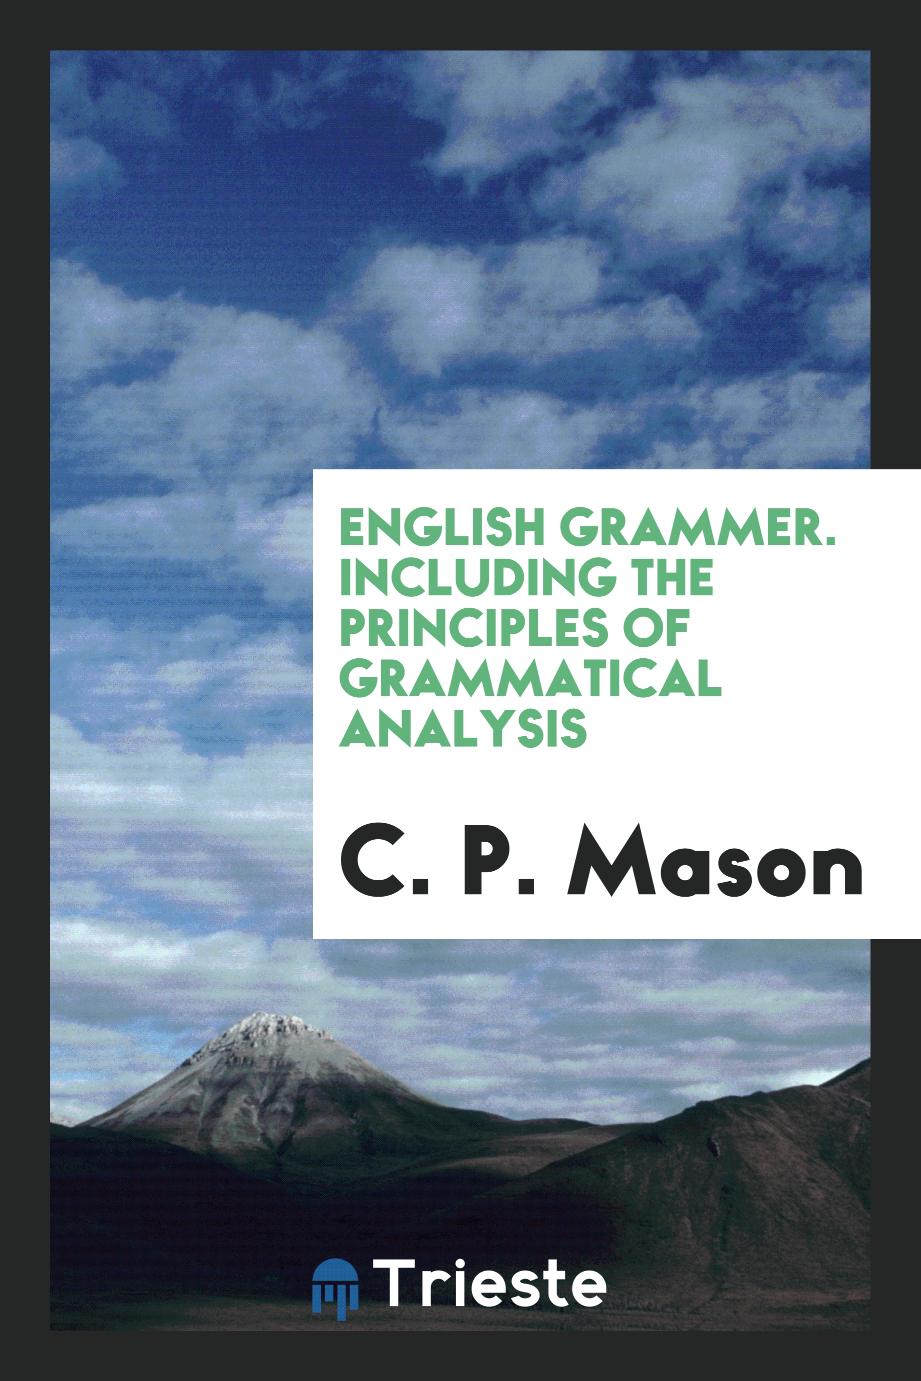 English Grammer. Including the Principles of Grammatical Analysis